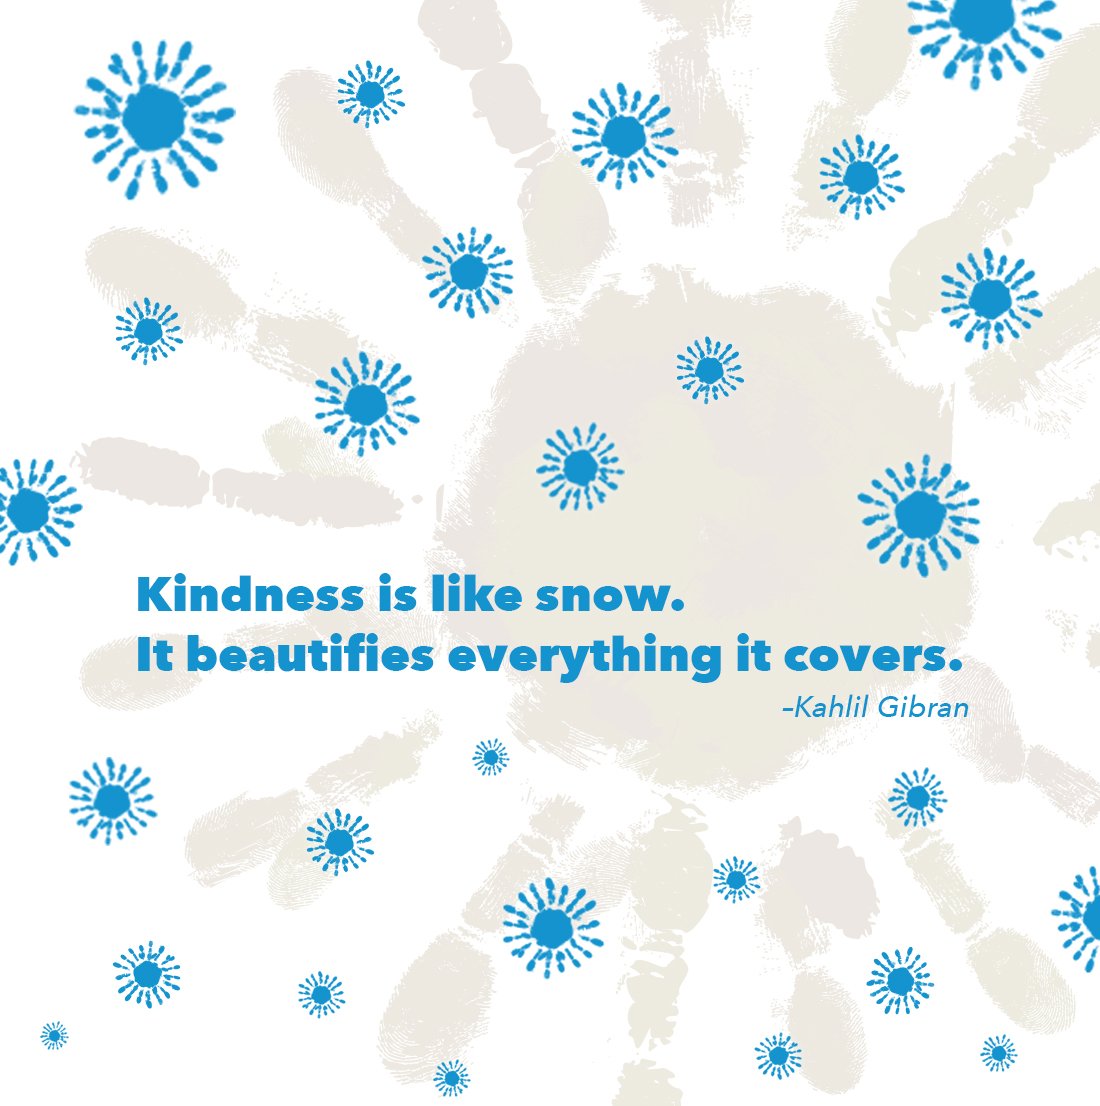 Here's some #WednesdayWisdom for this second #SnowDay in #March. Is it still #snowing where you are? #thundersnow #KahlilGibranQuote #BeKind #BeautifyYourWorld